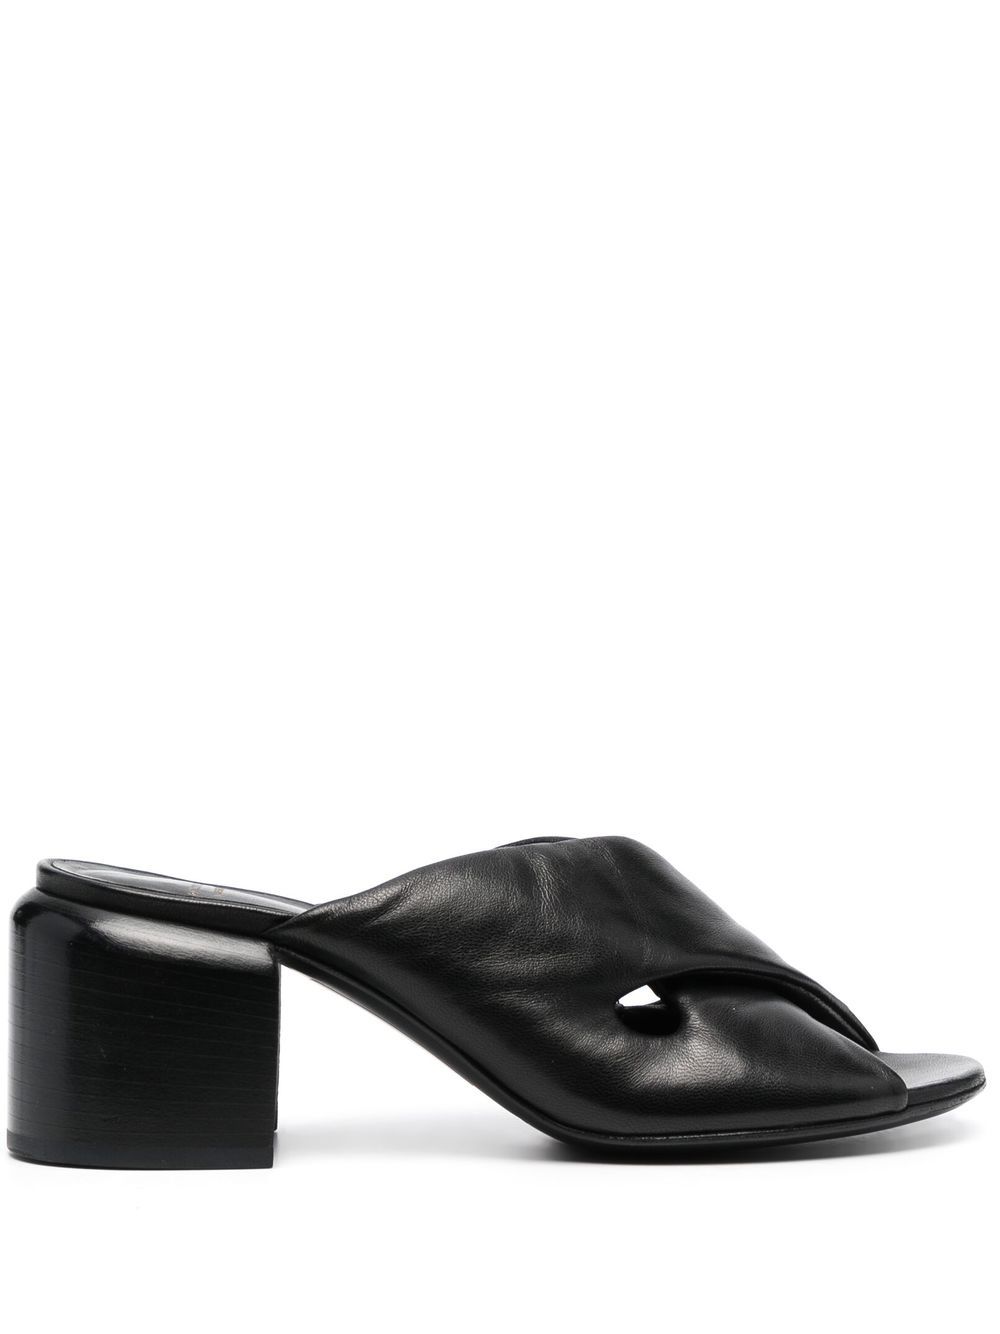 65mm open-toe leather mules